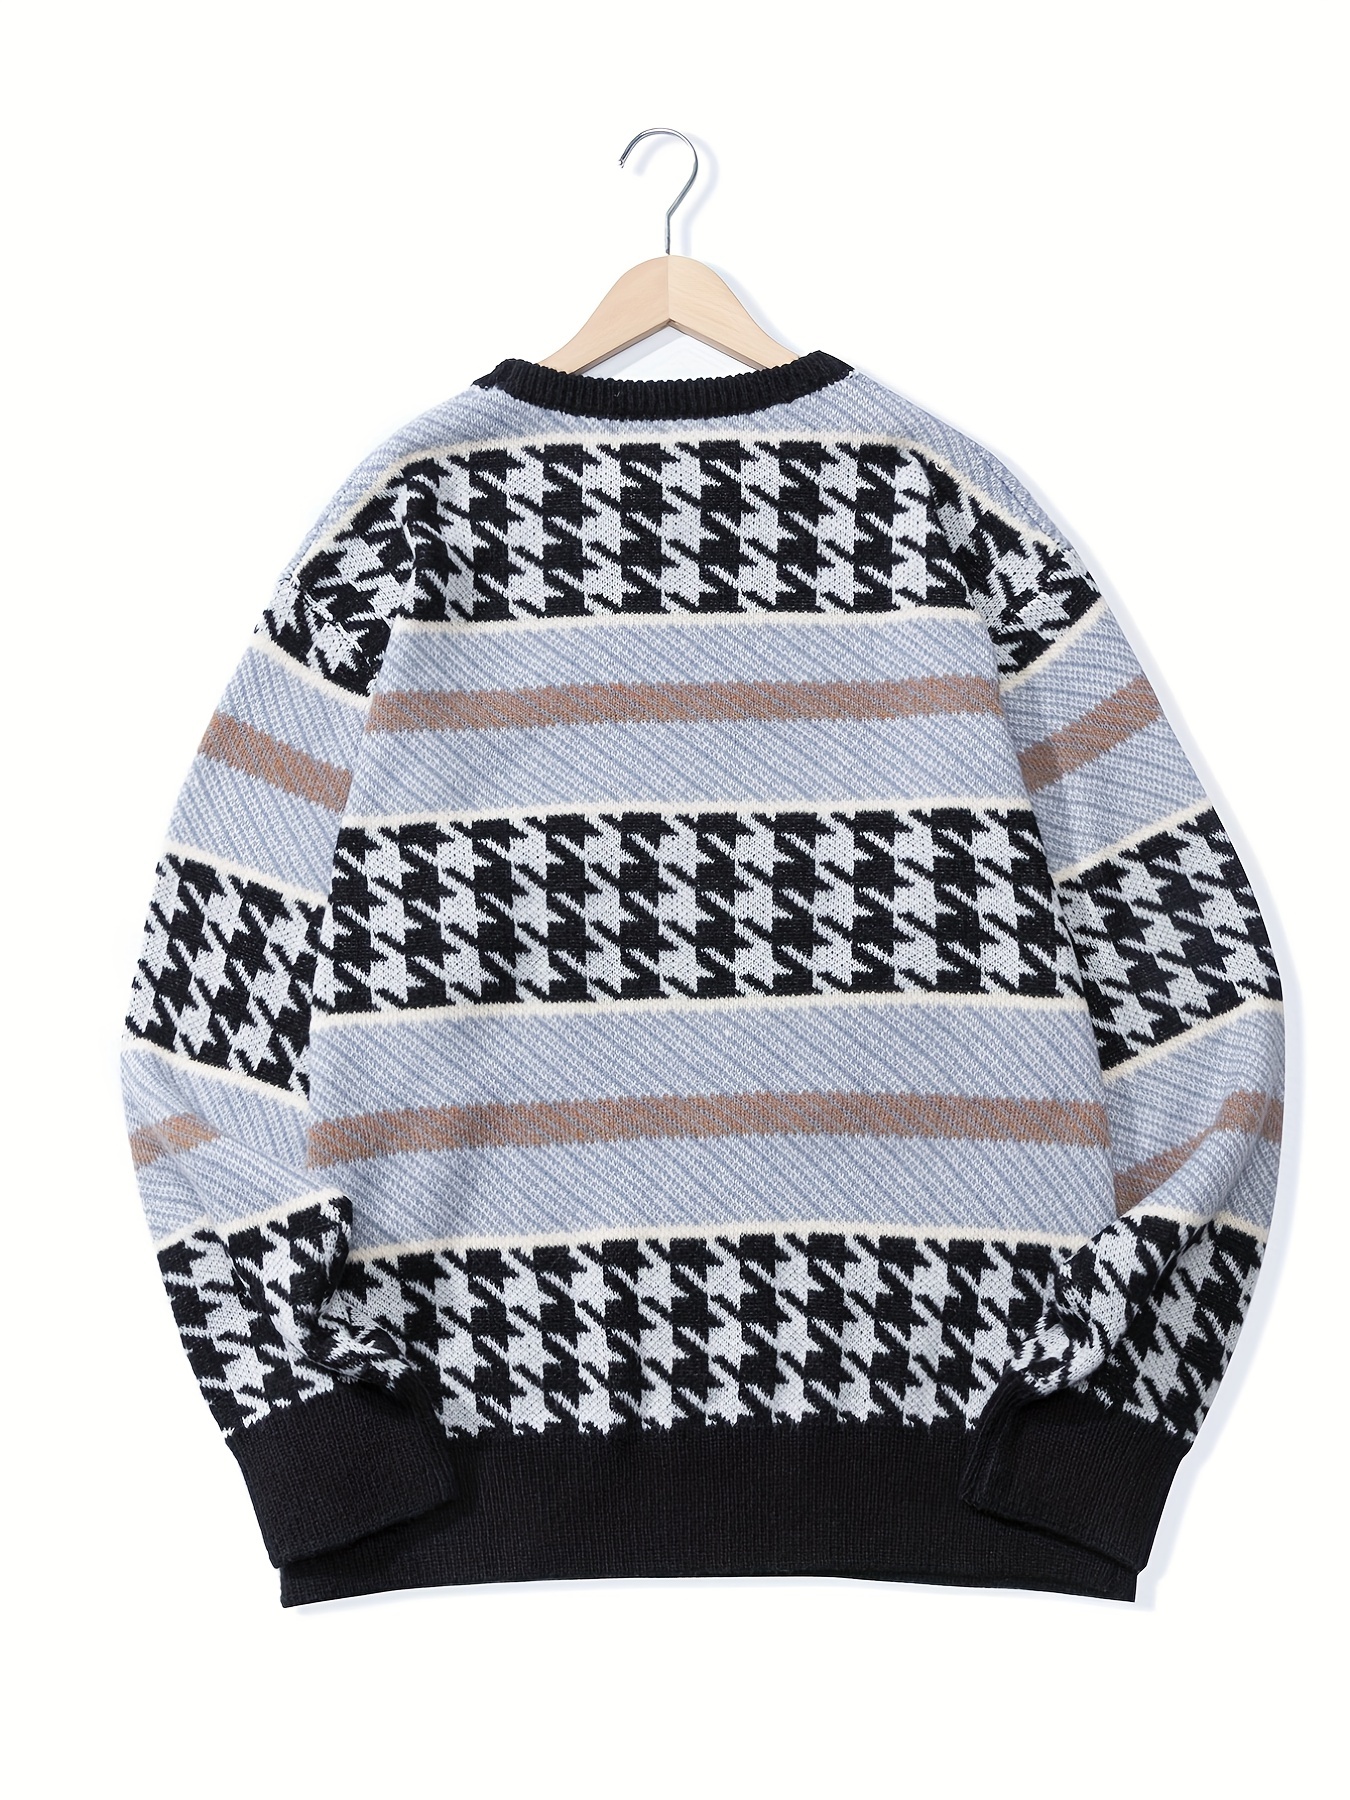 Black And White Round Neck Men Printed Woolen Sweater, Size: Large